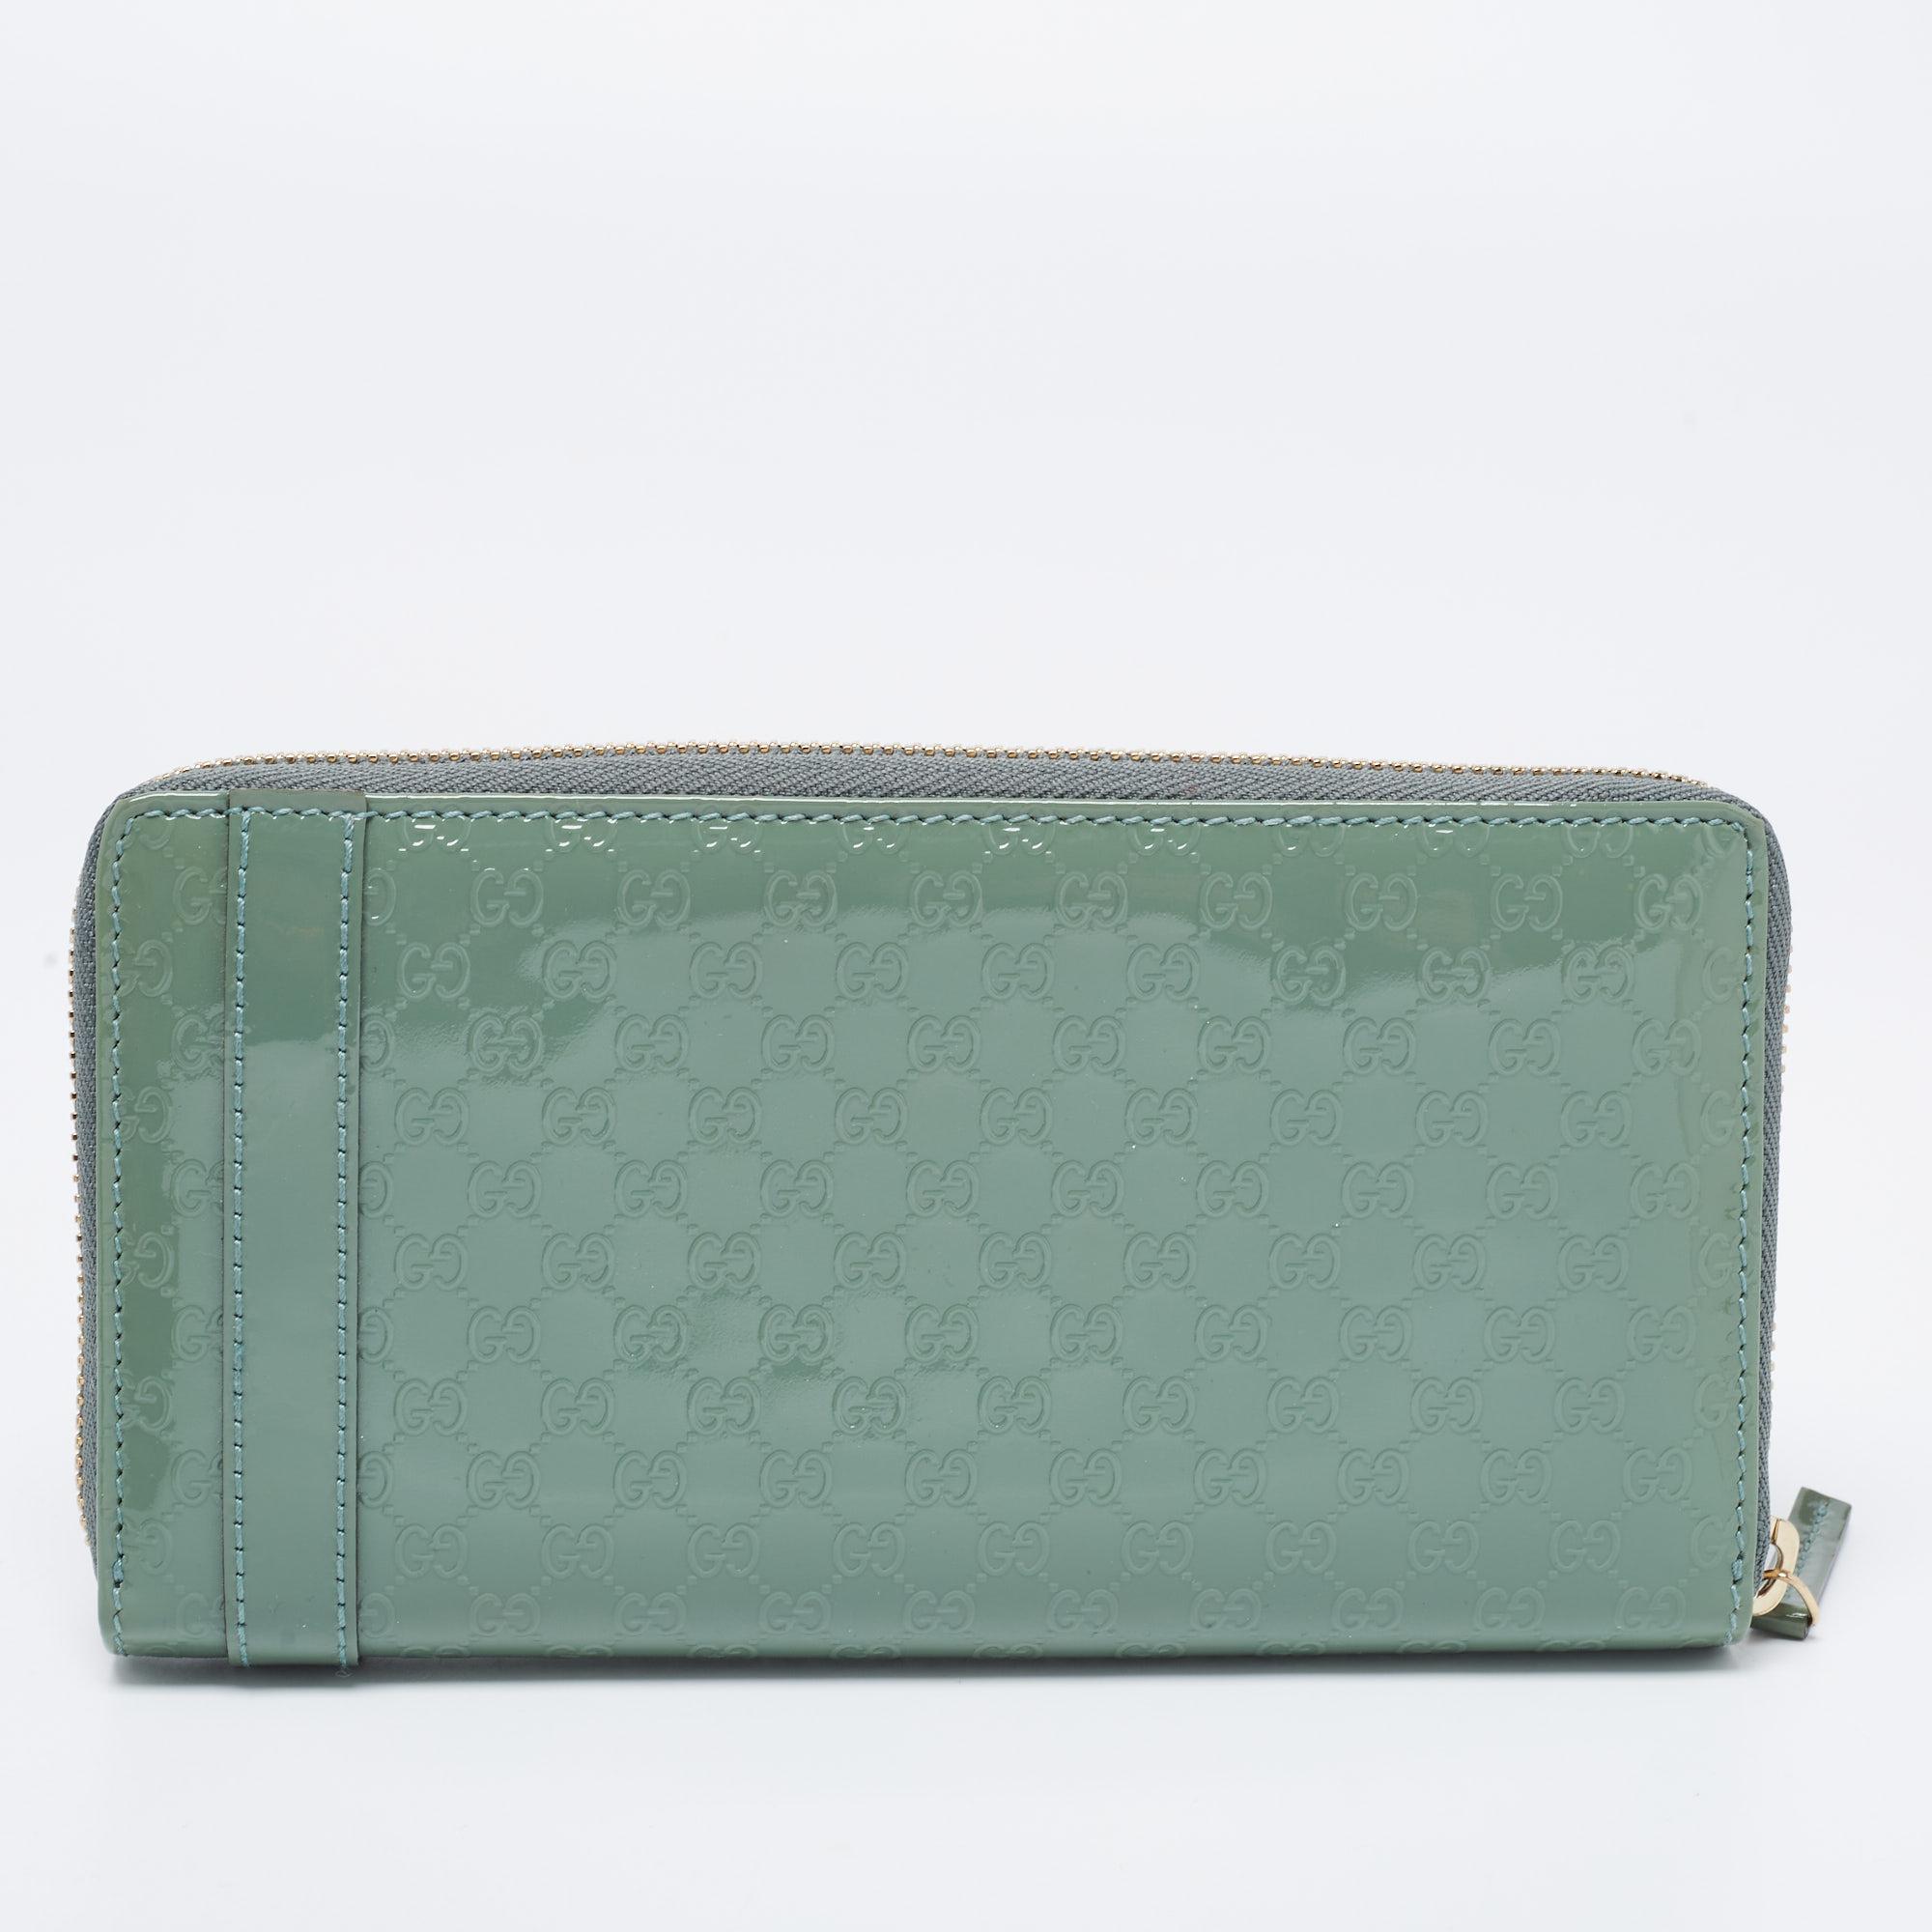 Ensure your essentials are in a secure place with this wallet from Gucci. Crafted using teal green, Microguccissima patent leather, this wallet is decorated with gold-tone hardware and has a zip-around feature. It comes with a well-spaced interior